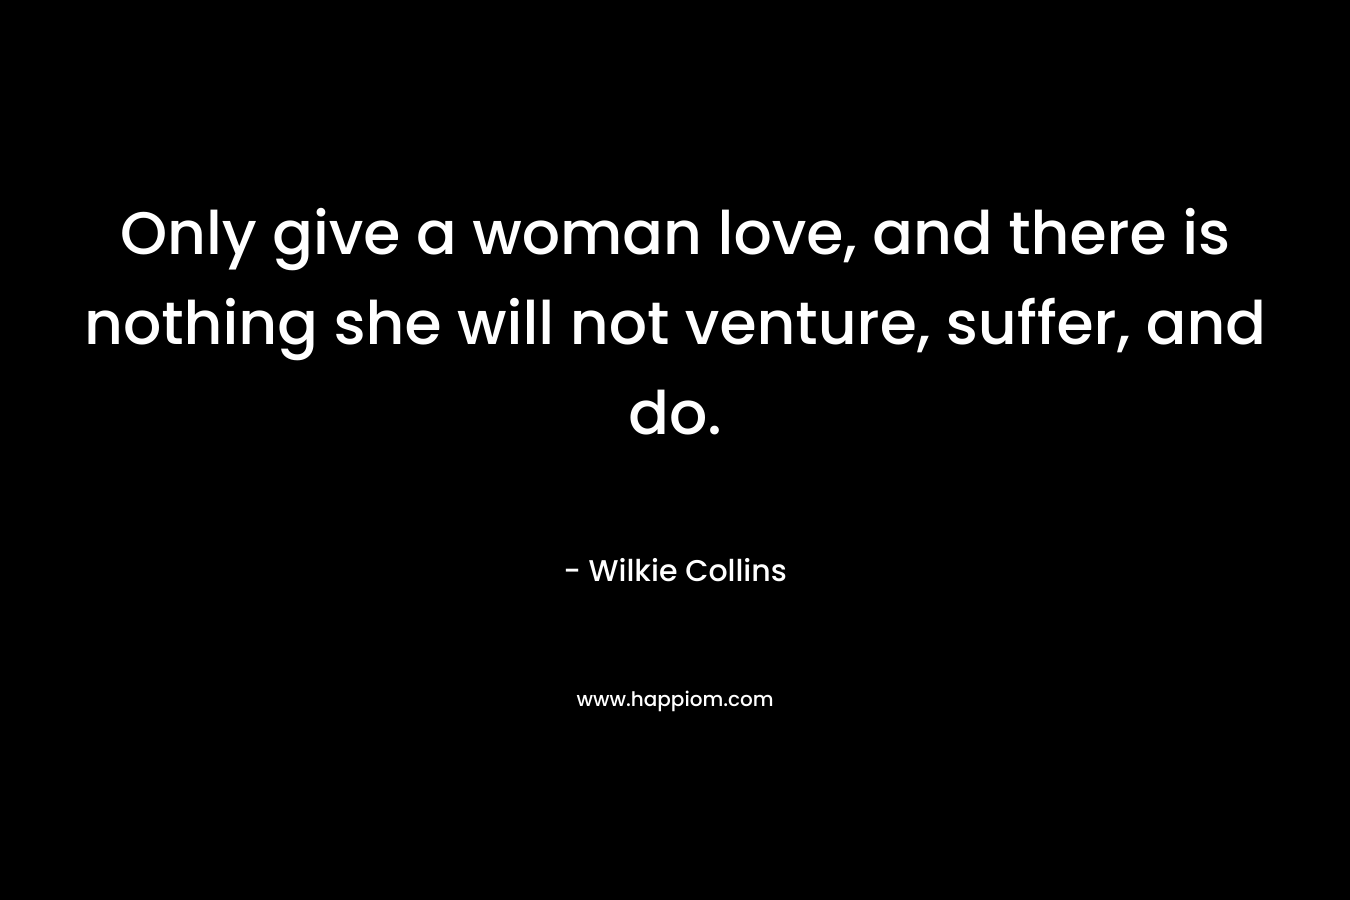 Only give a woman love, and there is nothing she will not venture, suffer, and do.